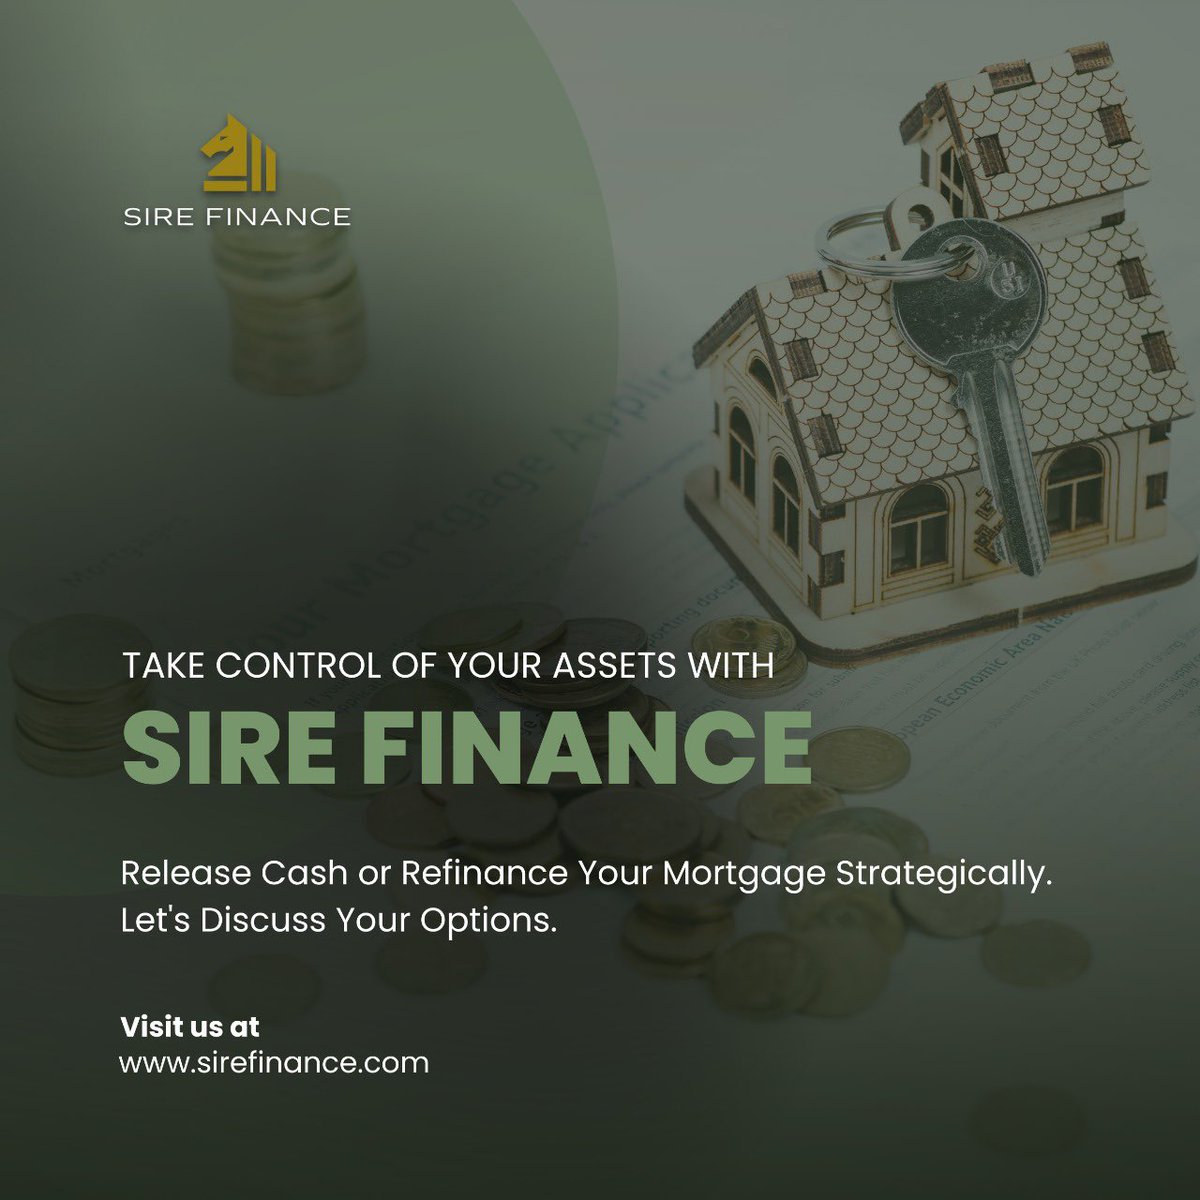 Take Control of Your Assets with Sire Finance!
Release Cash or Refinance Your Mortgage Strategically. Let's Discuss Your Options.
.
Visit us at sirefinance.com
.
.
.
#mortgage #realestate #realtor #mortgagebroker #home #realestateagent #firsttimehomebuyer #refinance